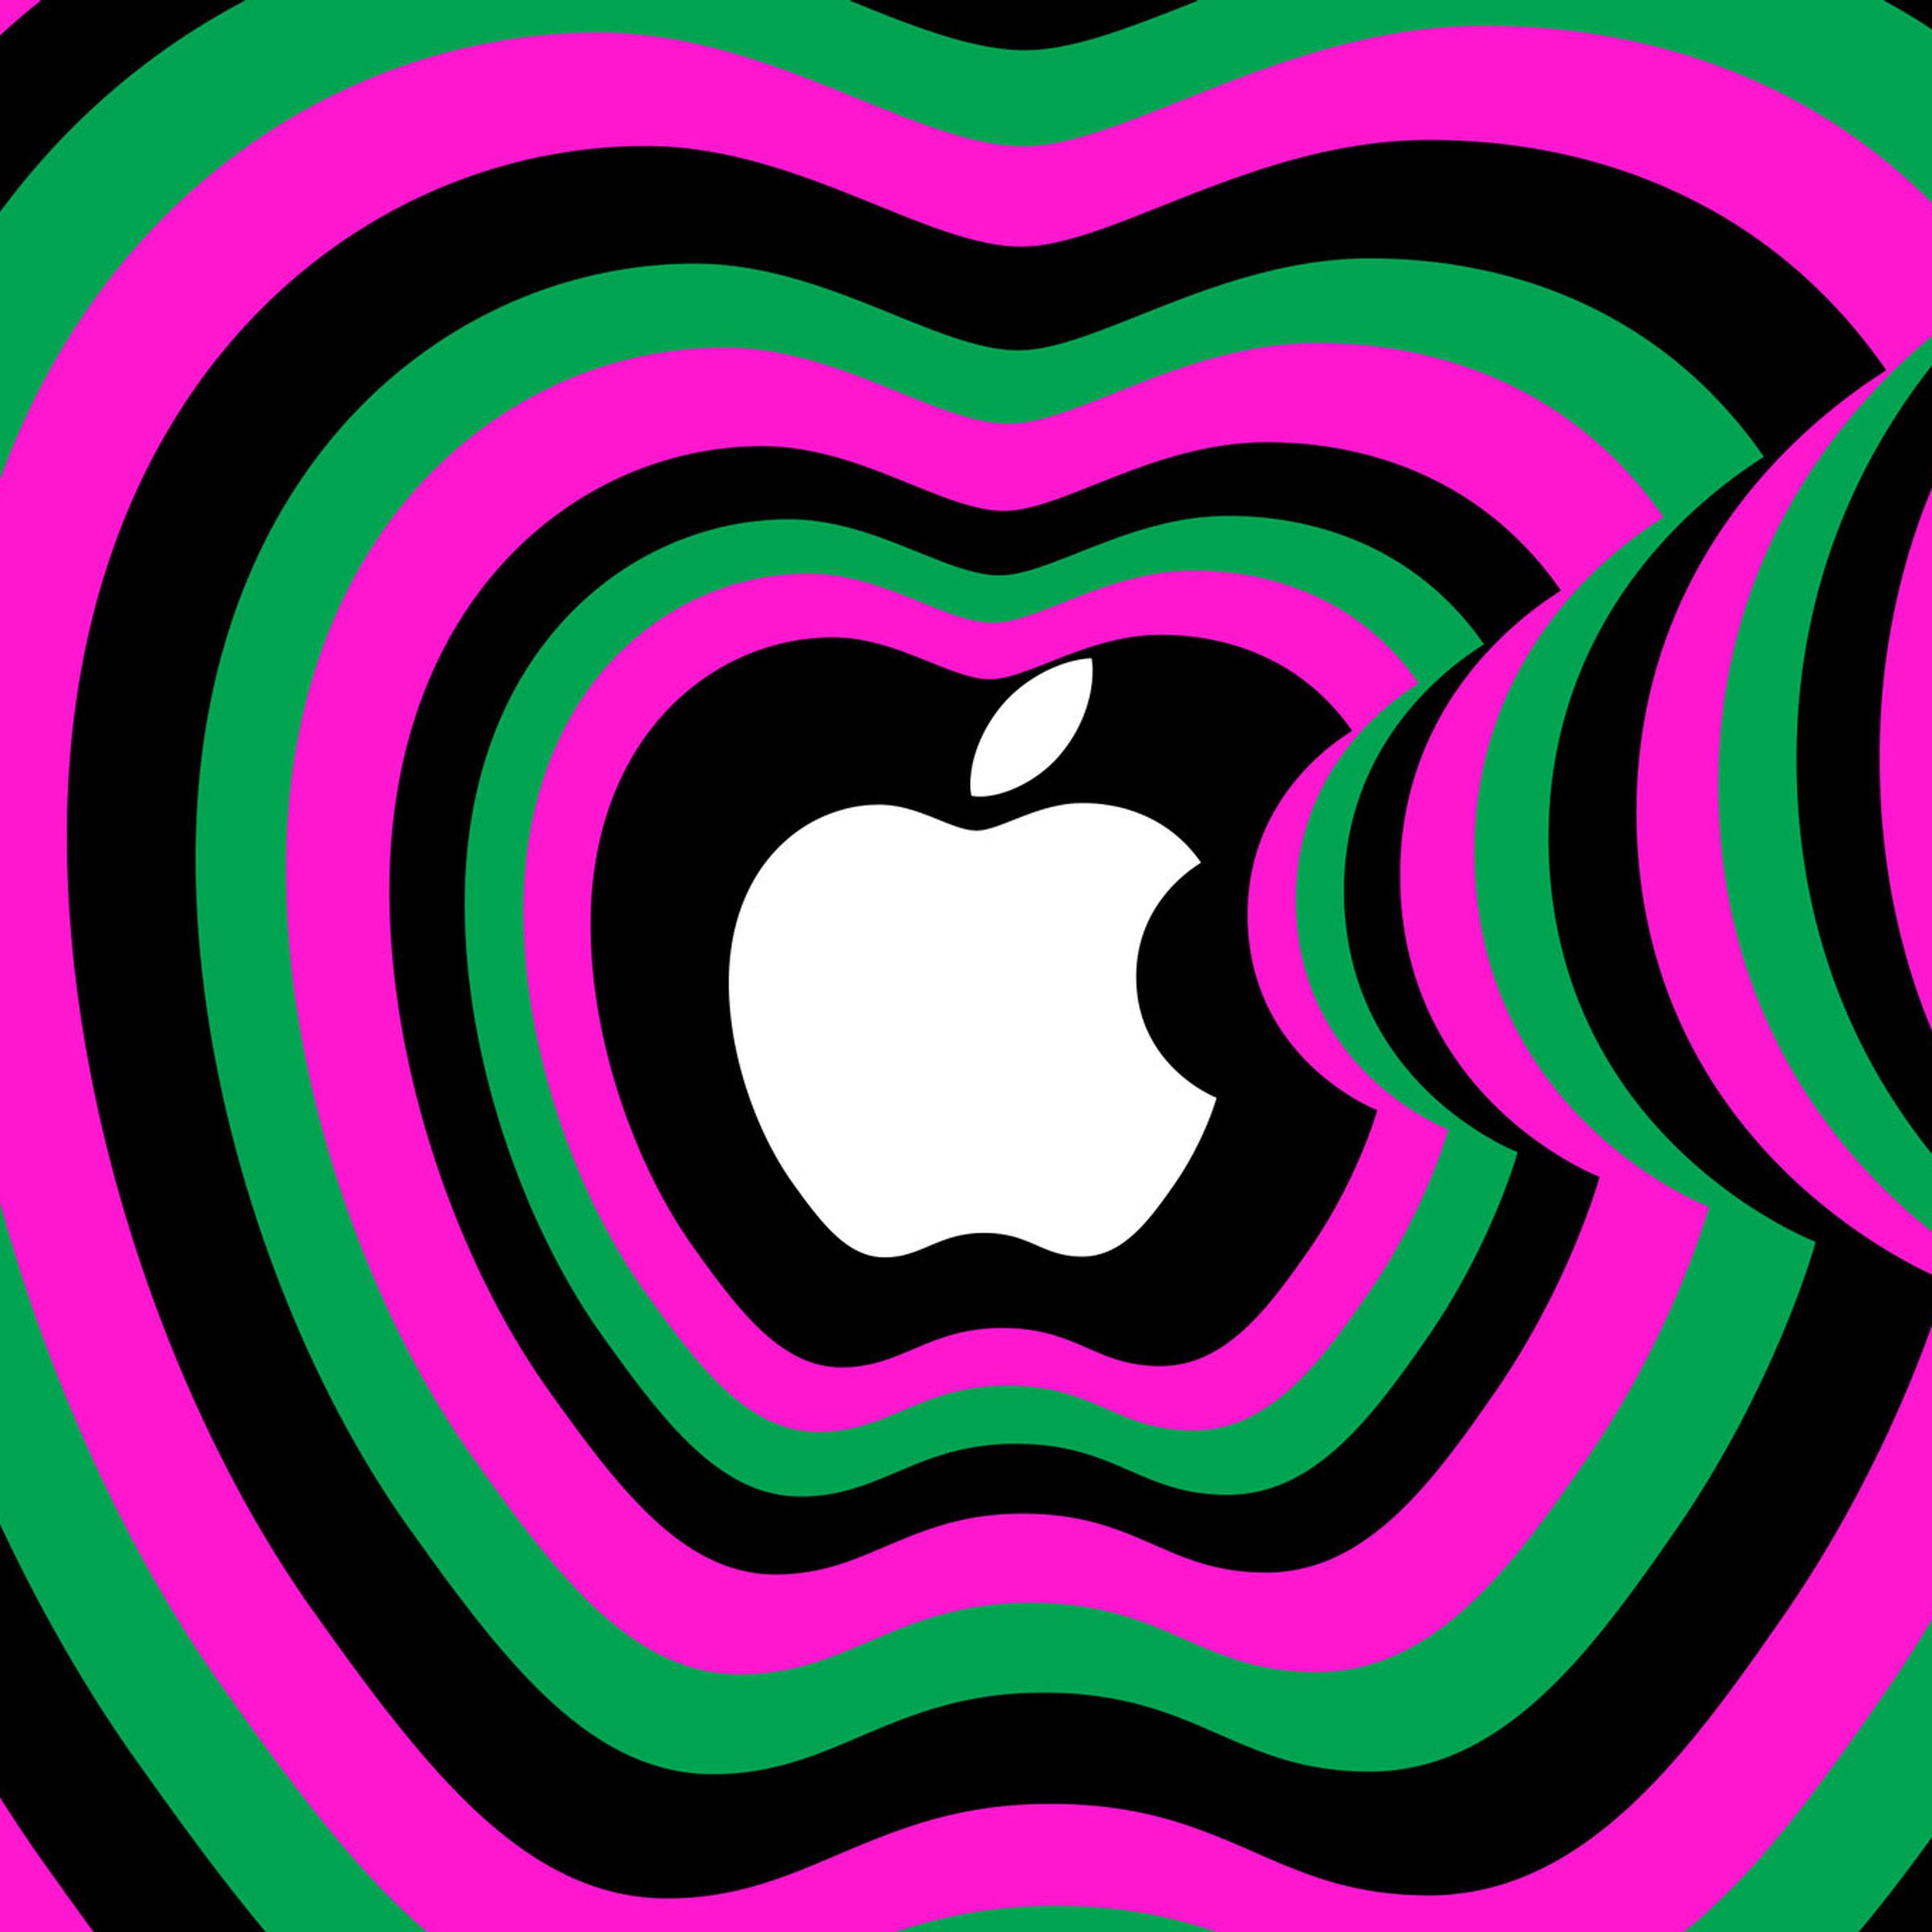 Image of the Apple logo surrounded by gray, pink, and green outlines